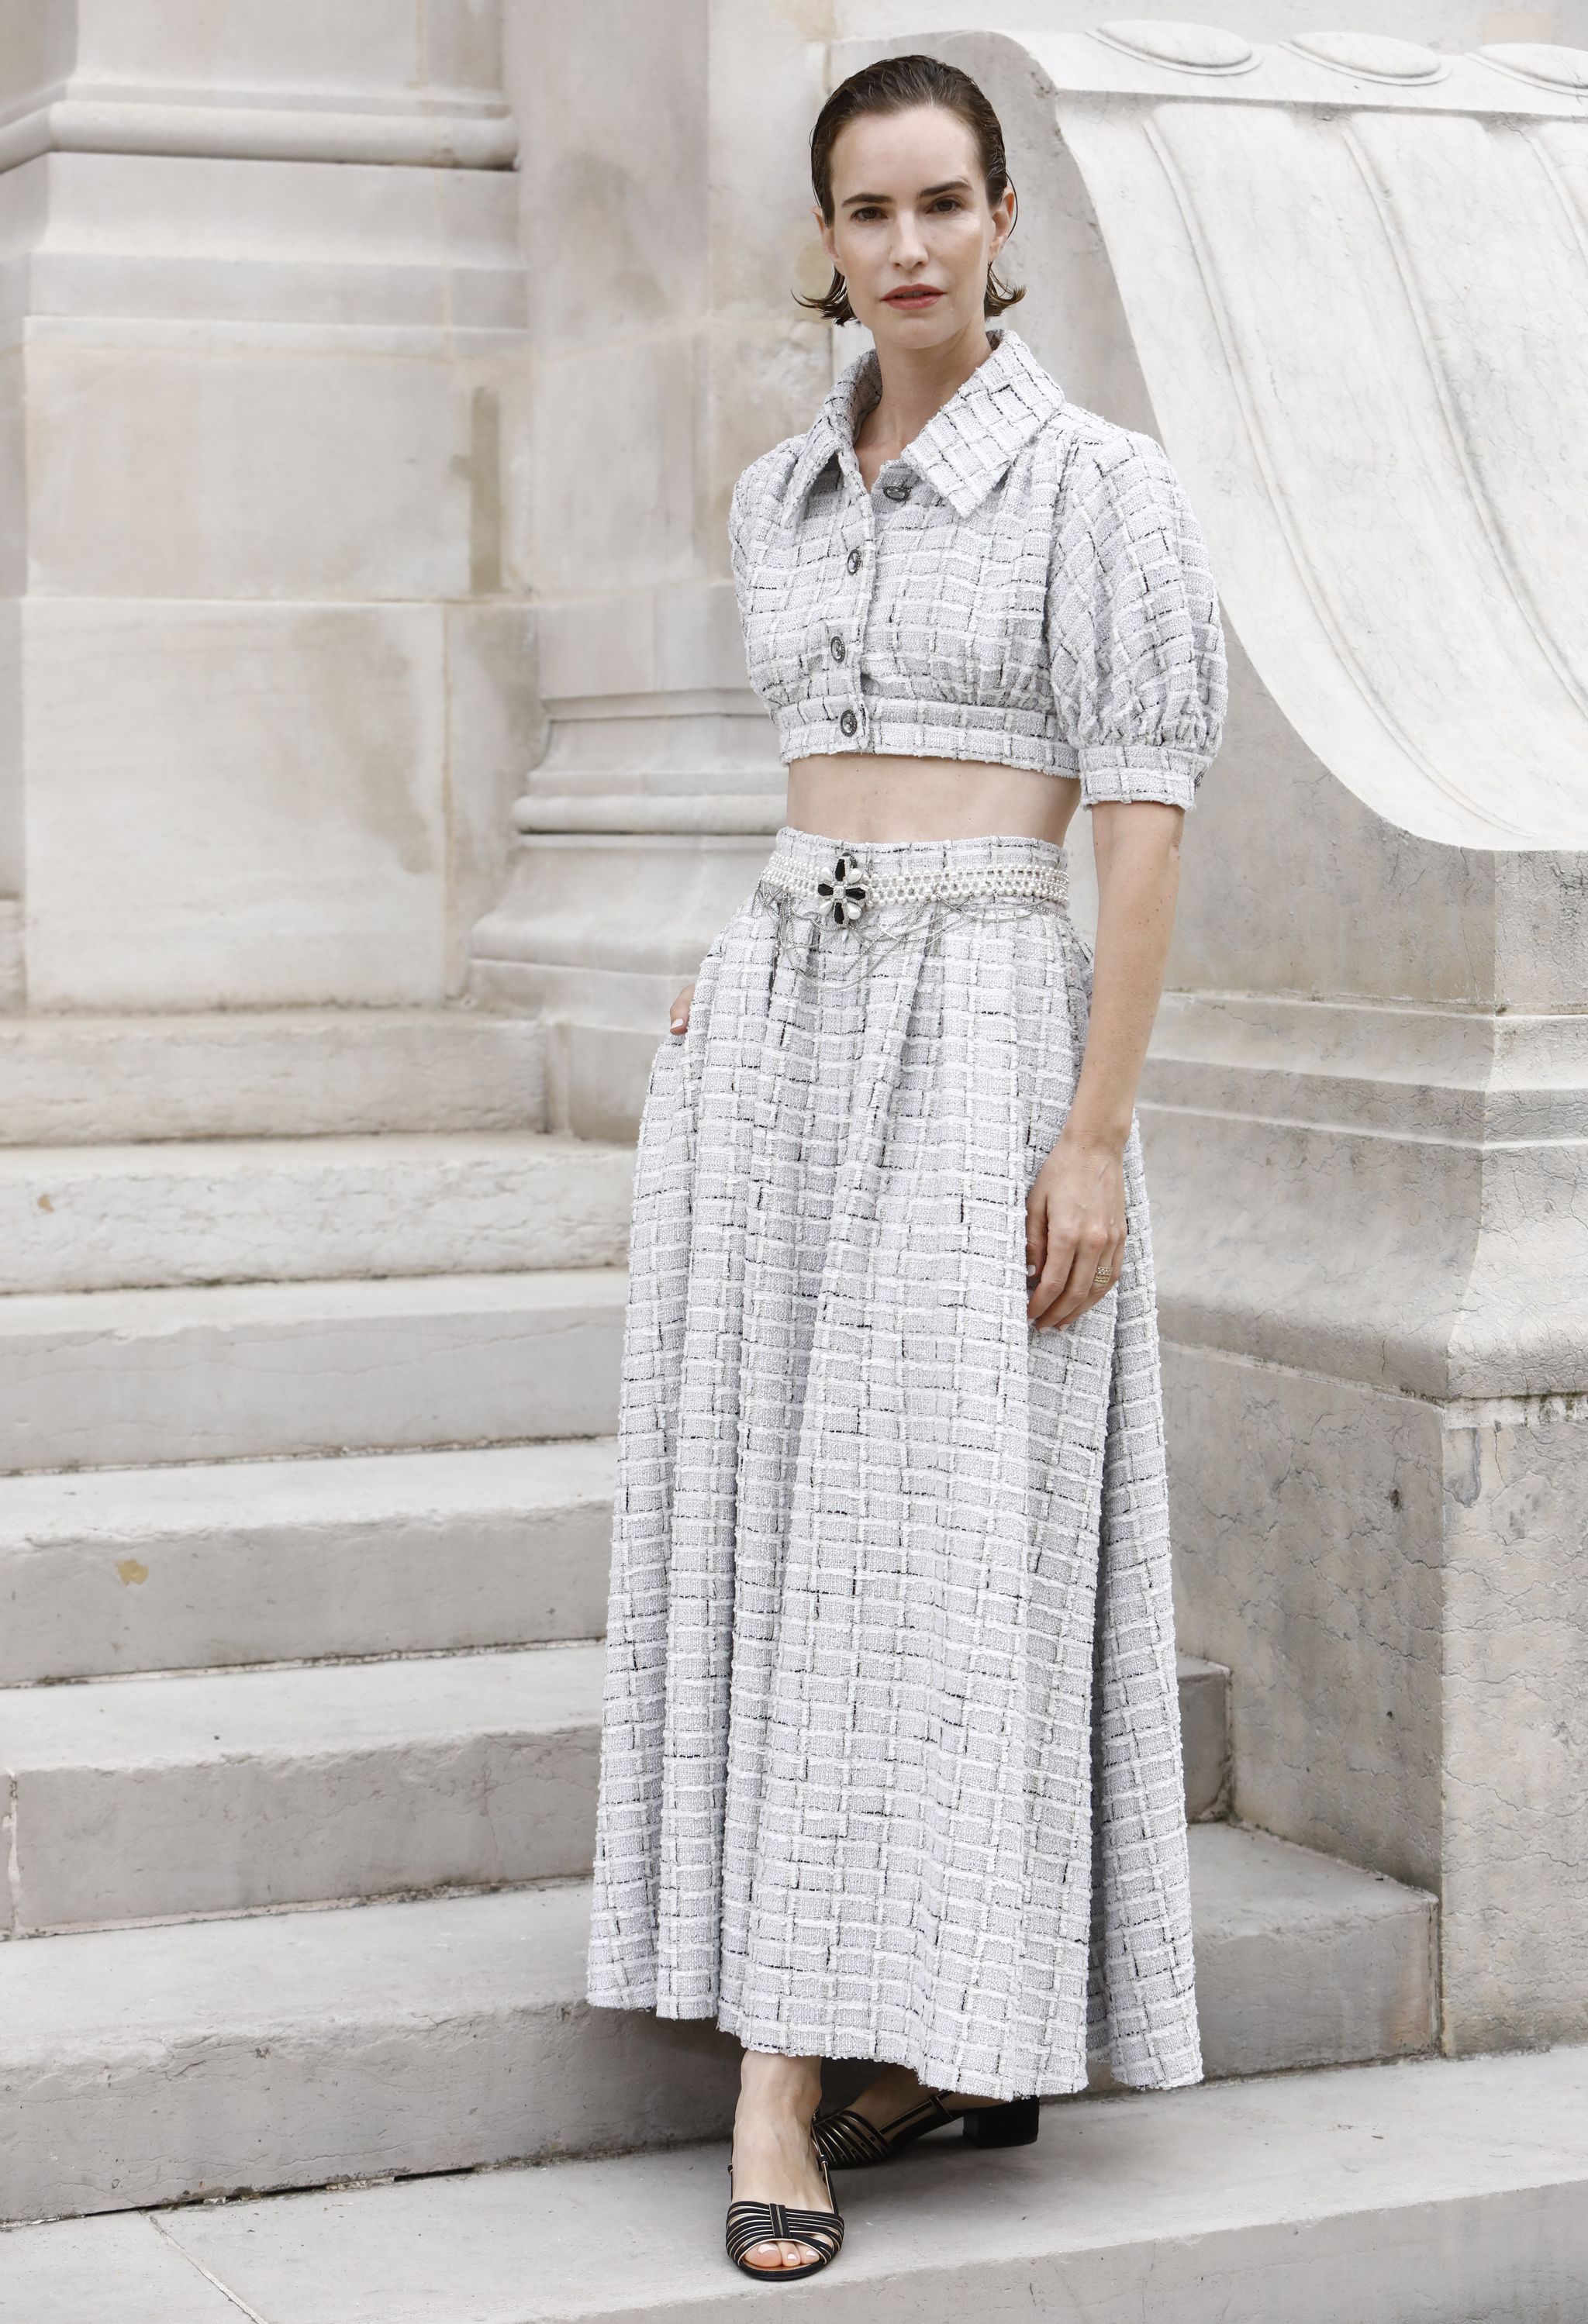 naama preis at chanel couture